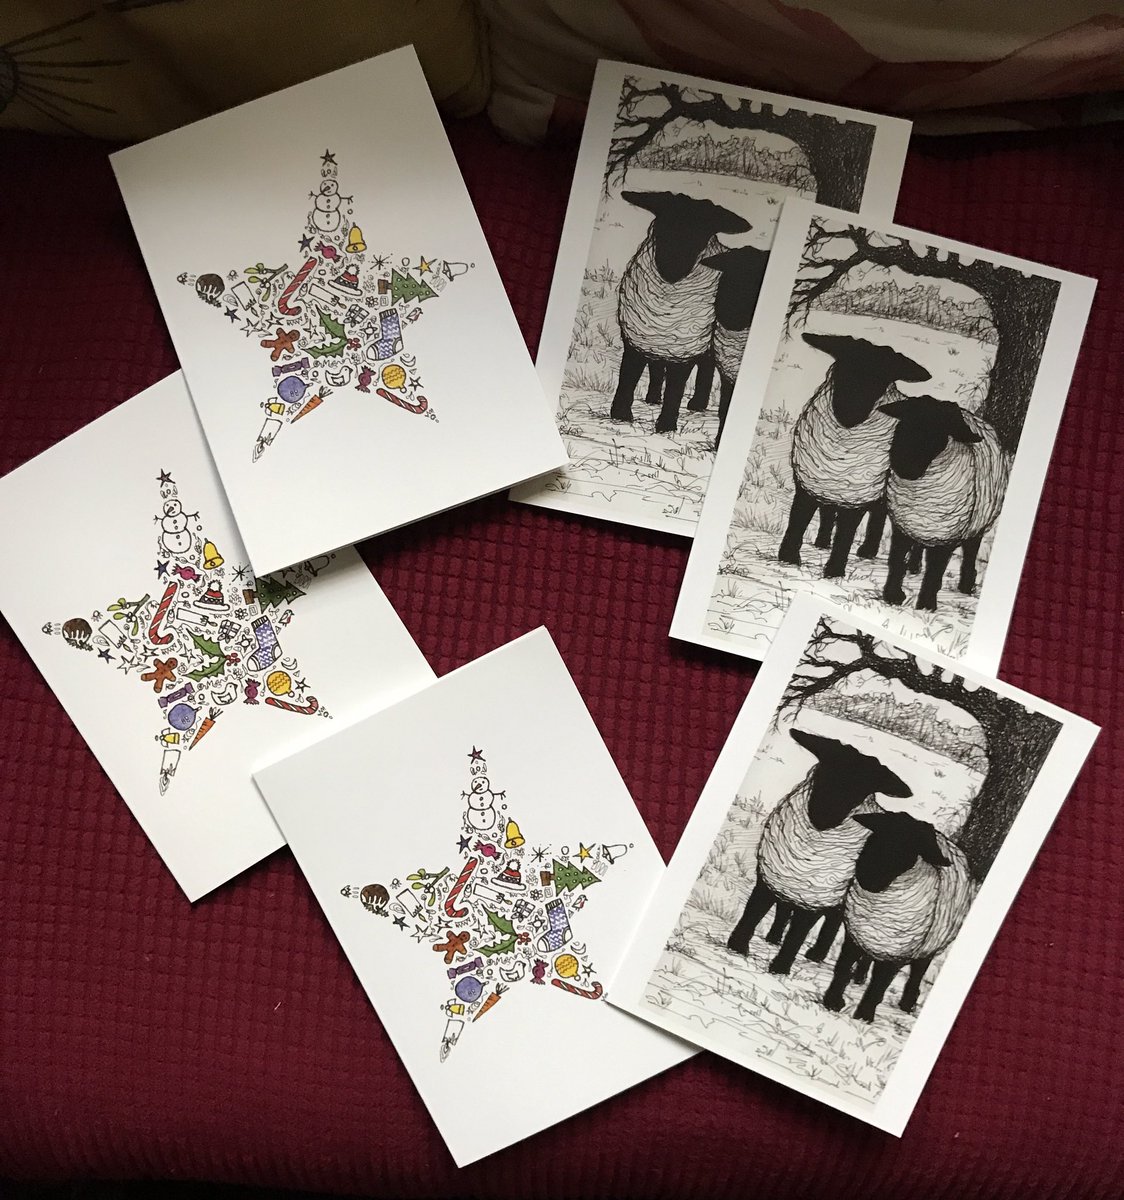 Alde and Ore Charity Christmas Cards available now - buy yours today from @SnapeMaltings @OCButcher @AldeBooks @SOSestuary #sufgolkartists #suffolkcoast #suffolkcharity #suffolklife #suffolkbusiness #suffolk #eastangliancoastline #riveralde #riverore #sheep